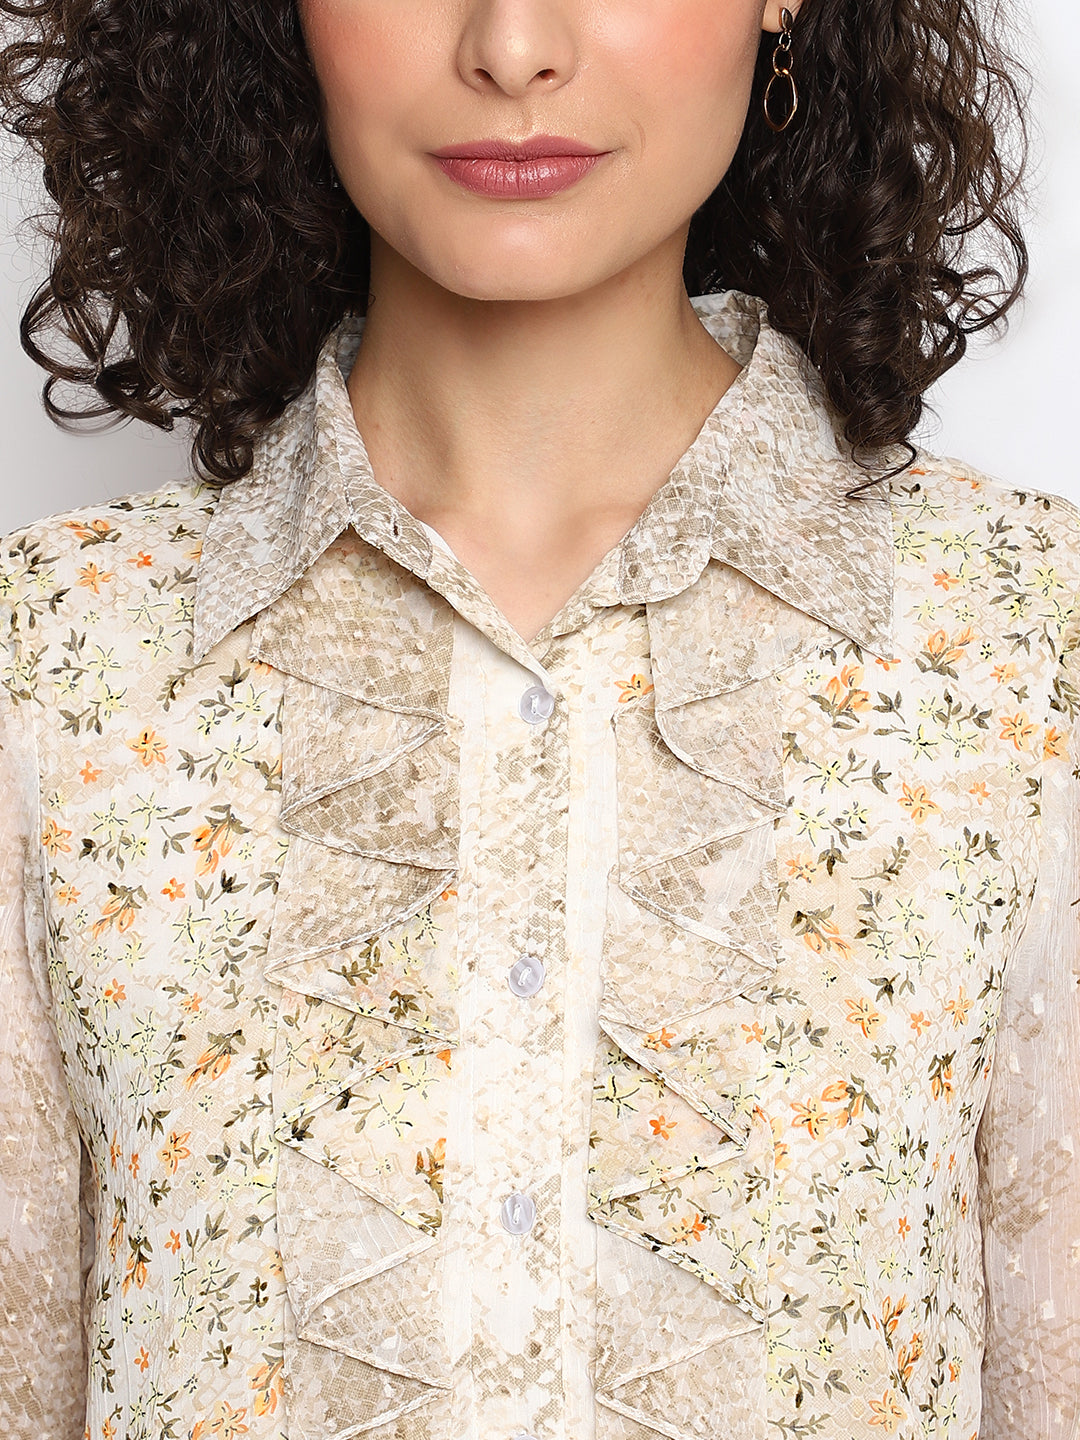 Beige 3/4 Sleeve Printed Polyester Blouse